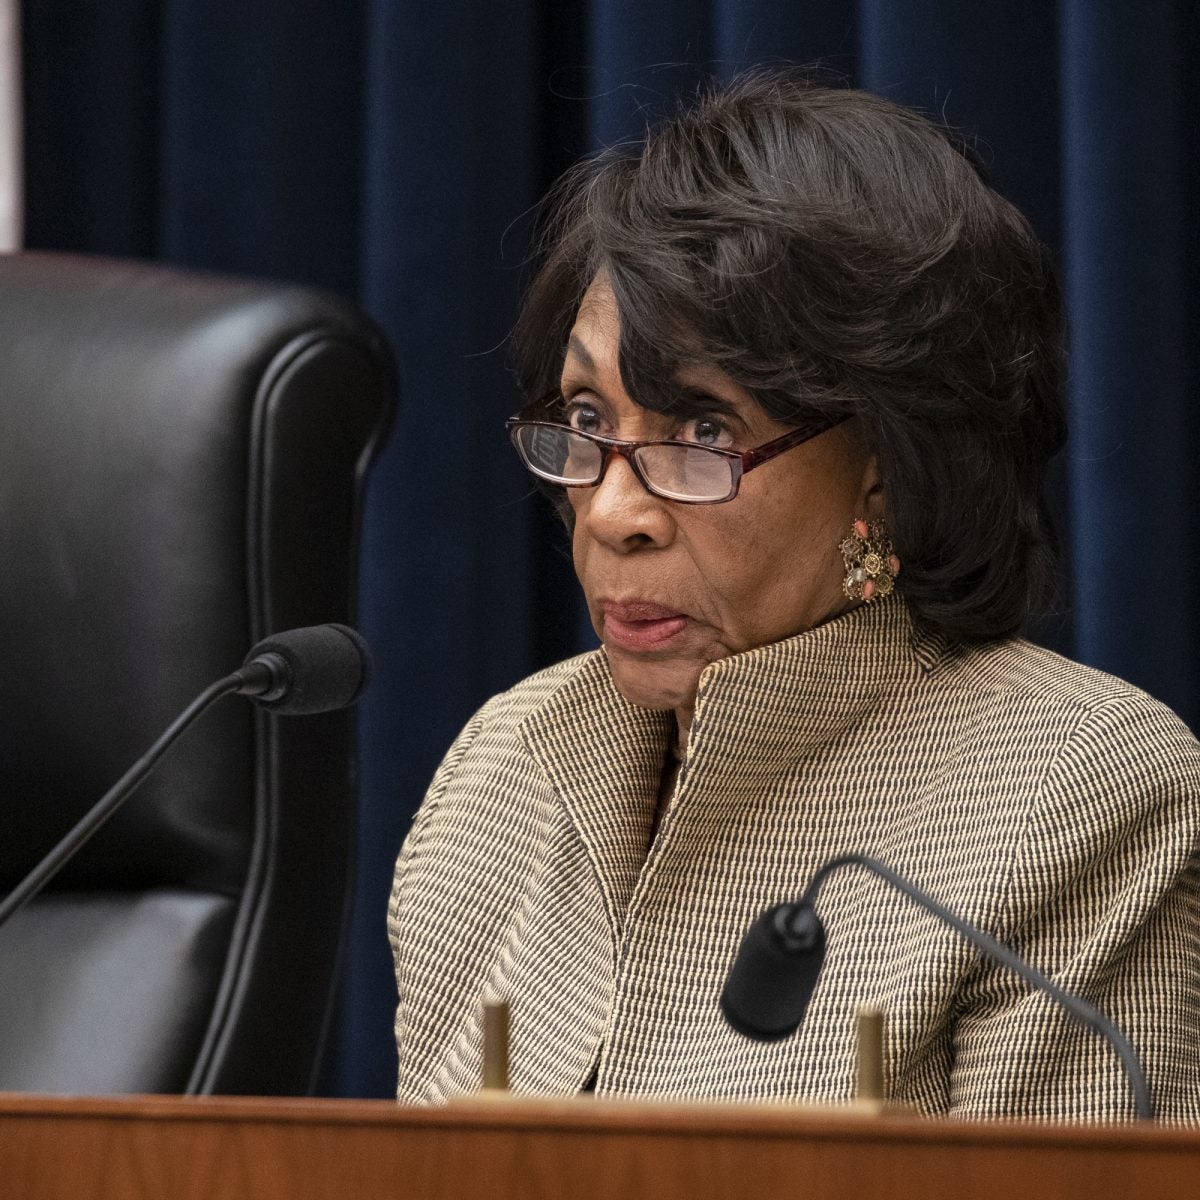 Maxine Waters Lays Into Trump Over Handling Of Pandemic: ‘You Incompetent Idiot’